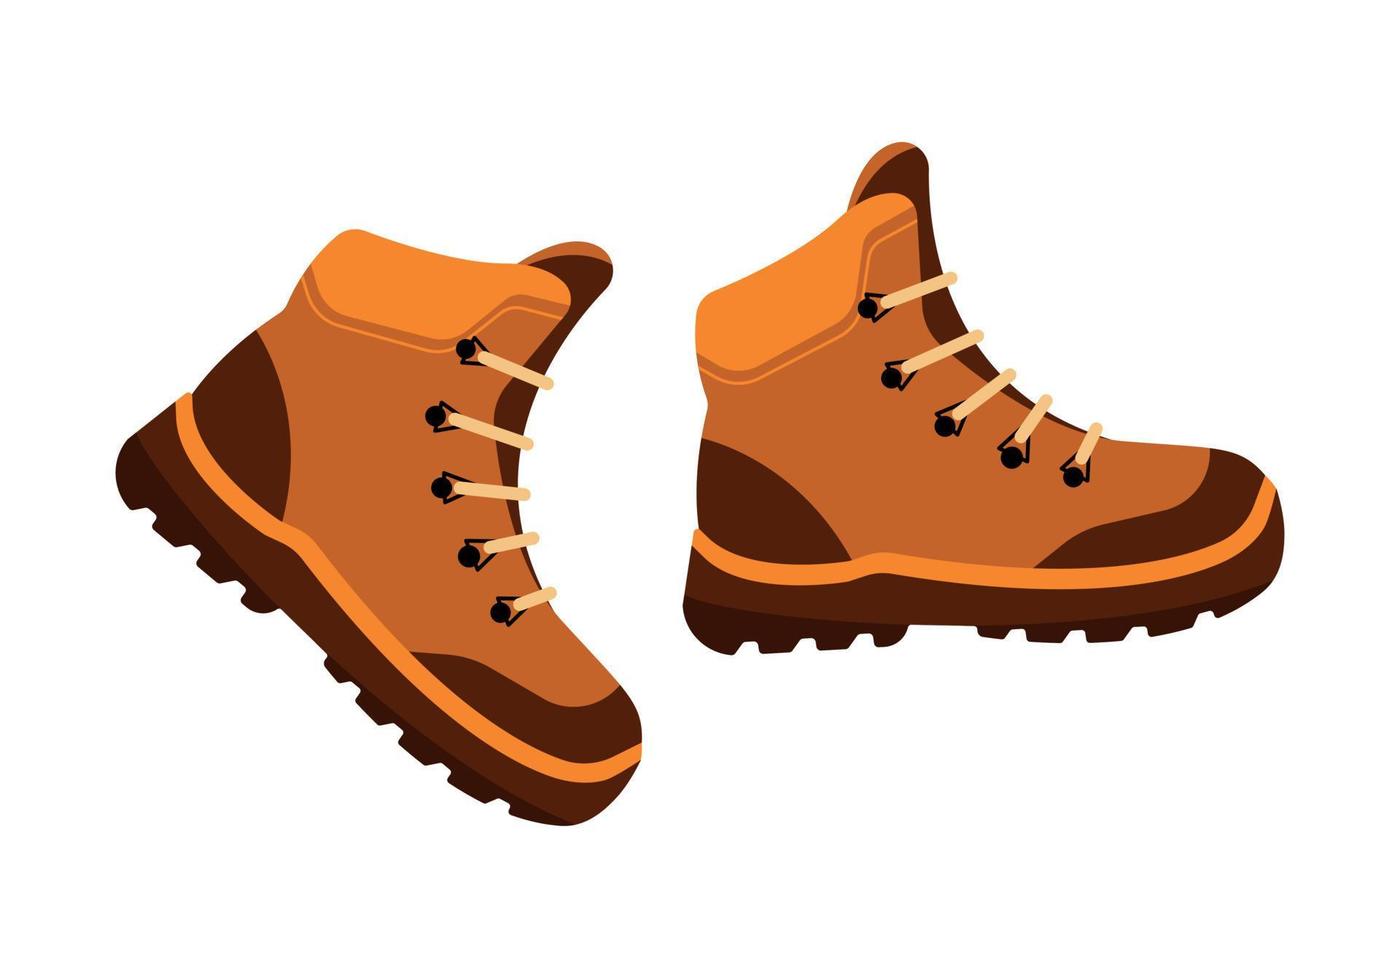 A pair of shoes for hiking, camping, walking. Tourist trekking boots for outdoor activity. Footwear icon vector illustration isolated on white background.